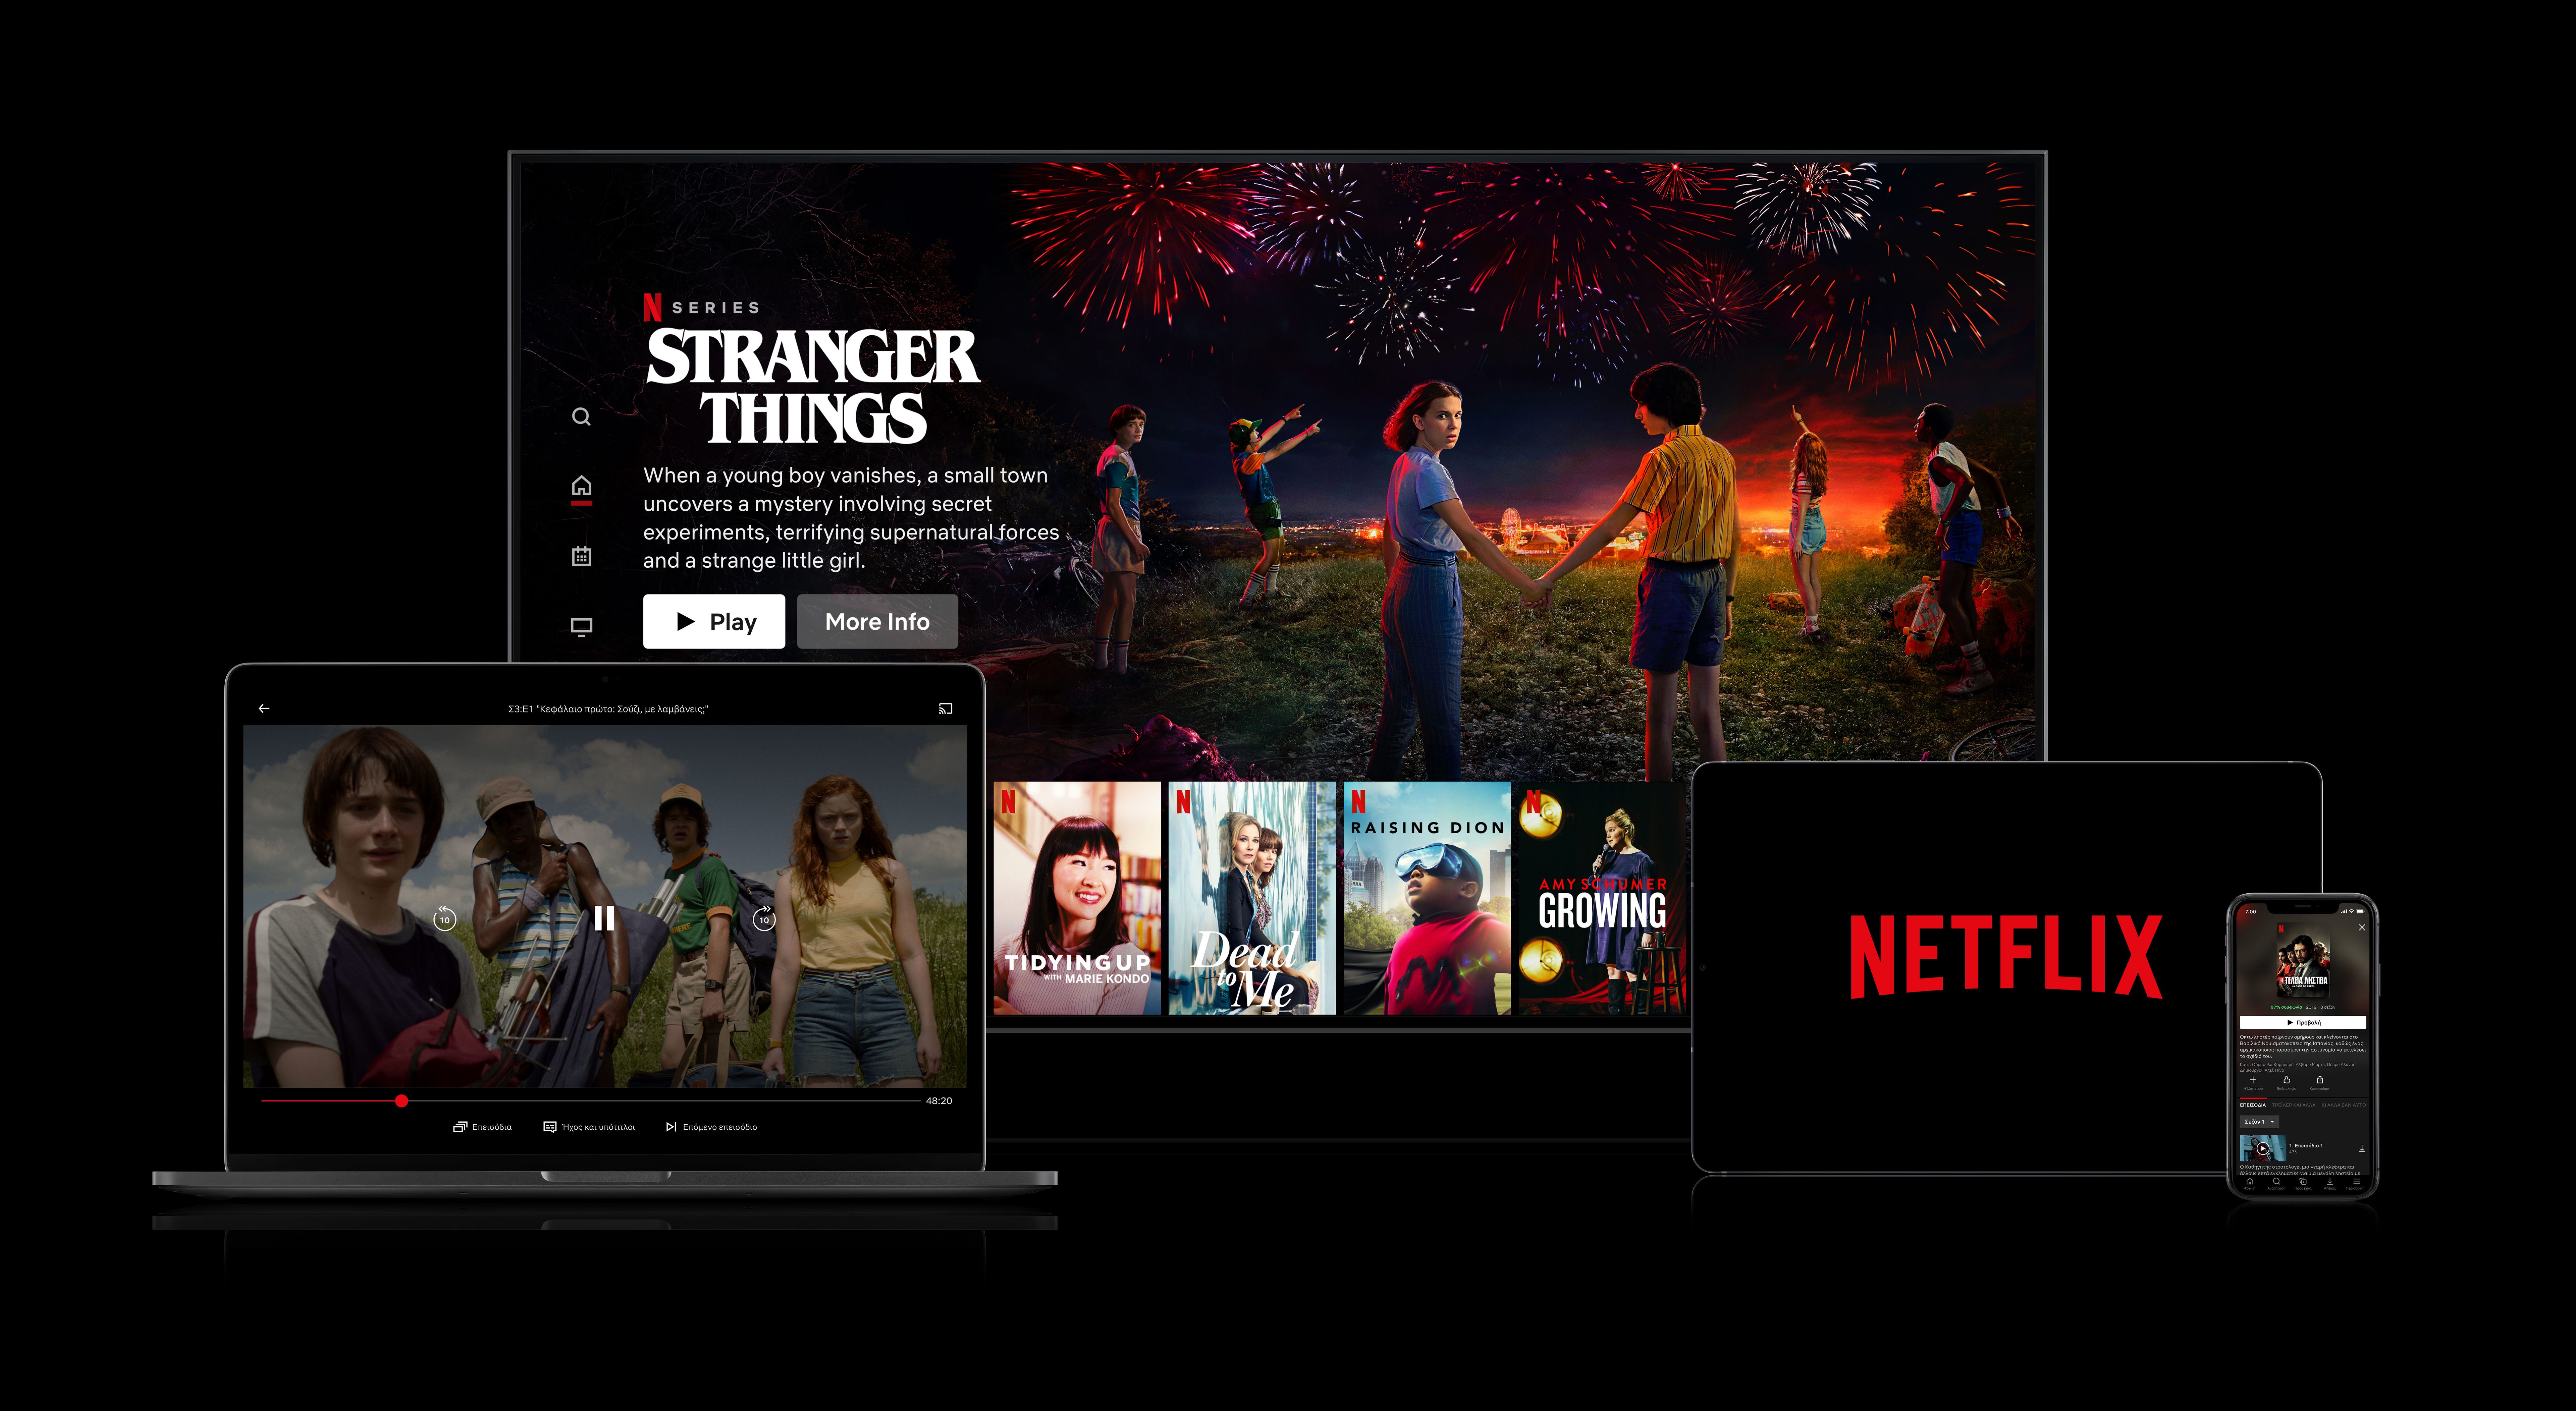 Netflix&#39;s Strong Q1 Net Adds Leave Some On Wall Street Worried, Wedbush Sees &#39;Imminent Dilemma&#39;